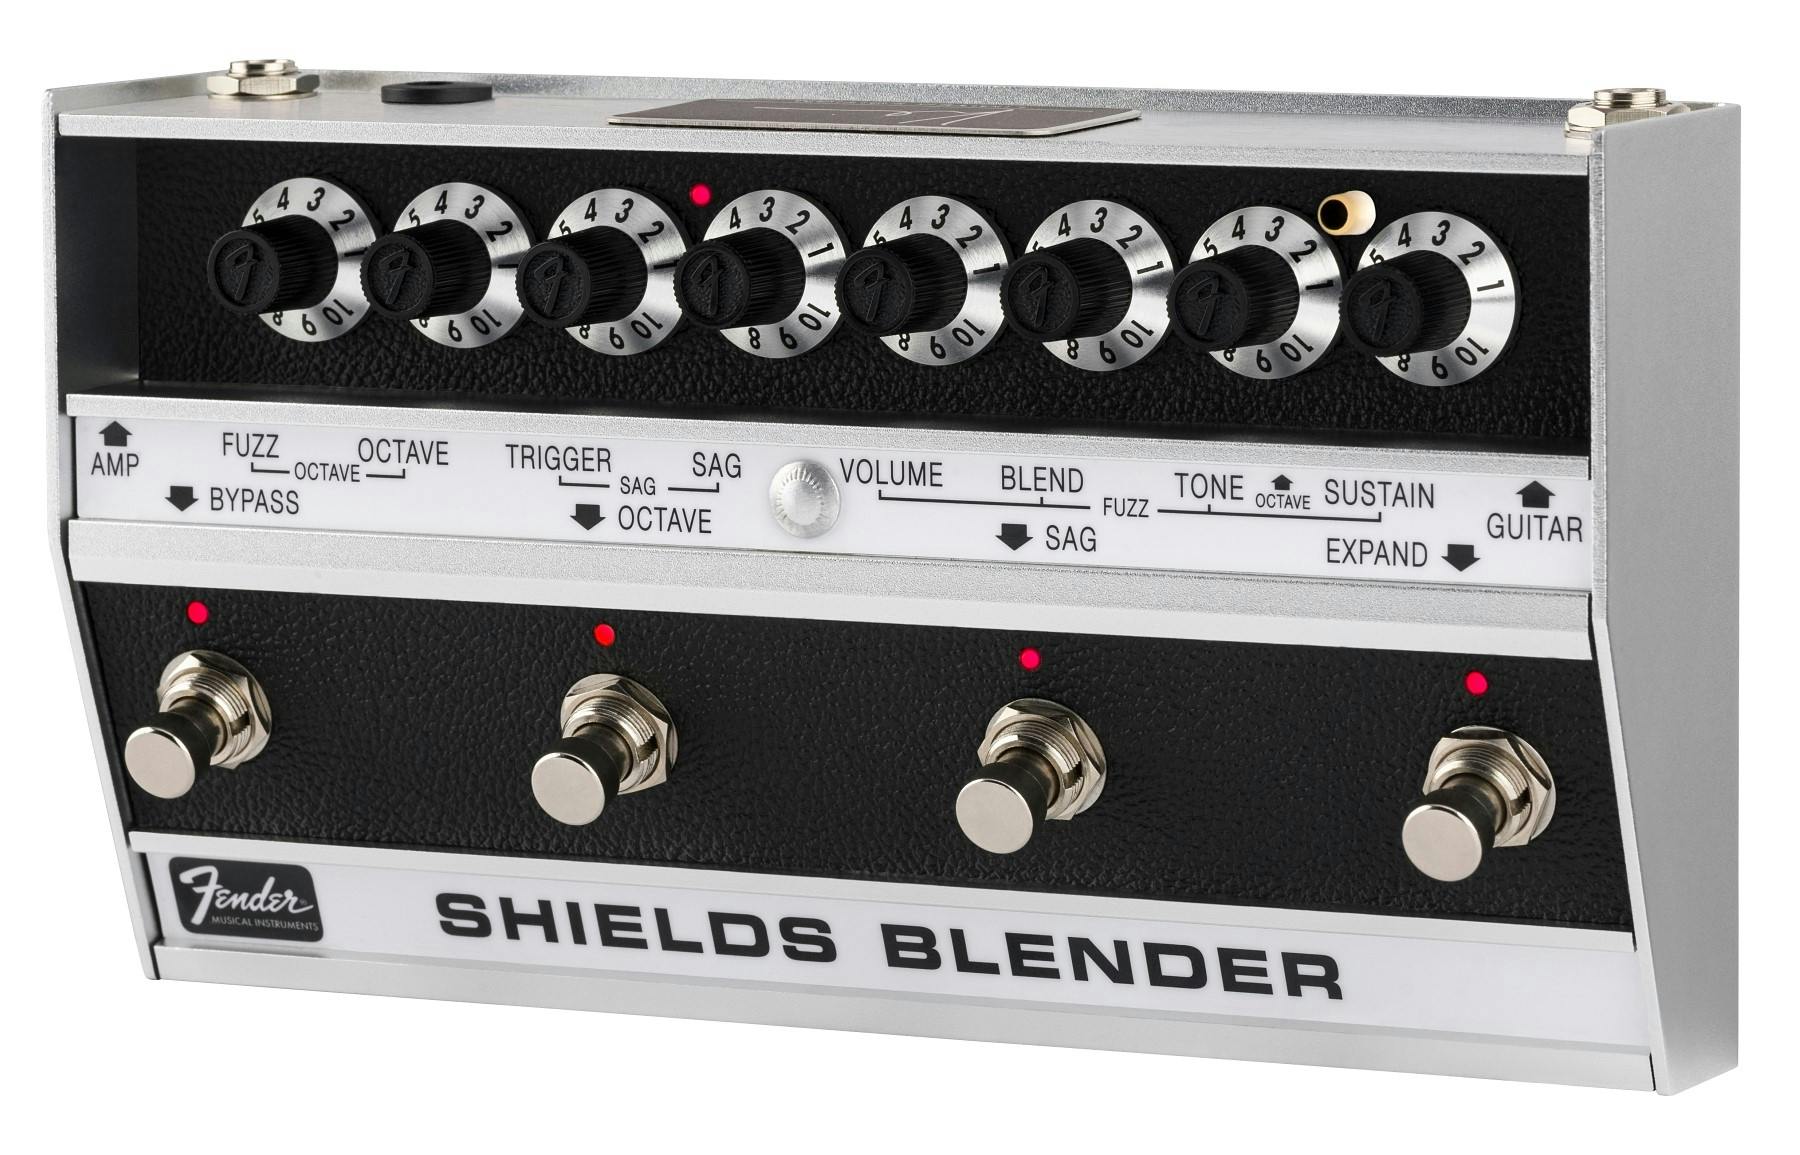 Fender Kevin Shields Blender Limited Edition Fuzz Pedal - SOLD OUT